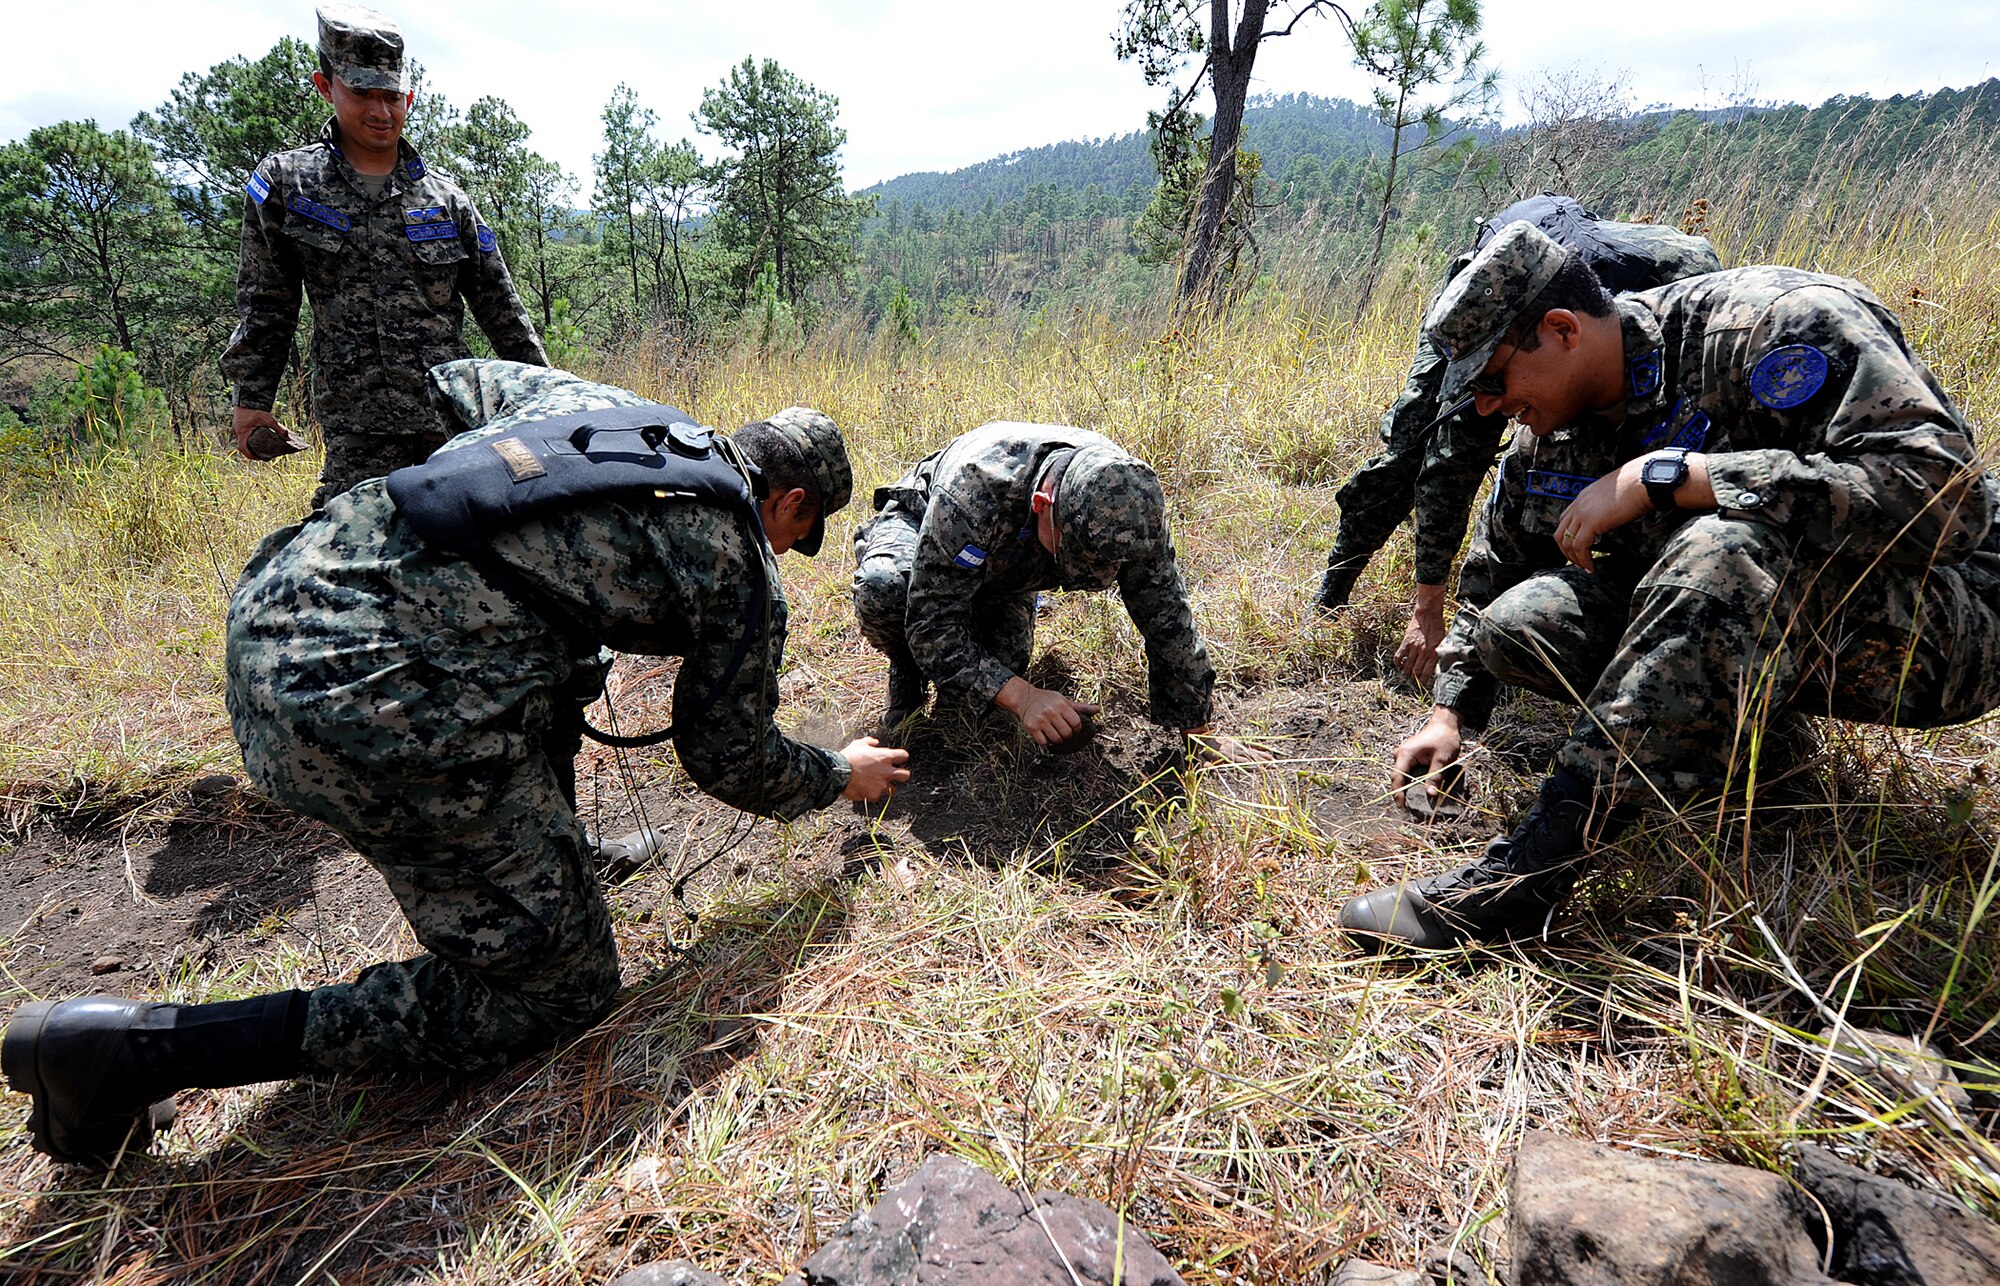 Honduran Air Force air crew members and soldiers from the Honduran army's unit TESON clear an area by making a "V" in the ground to help an aircraft locate their position during the vectoring application of the aircrew survival seminar at Tamara, Honduras, Feb. 15.  TESON stands for Tropas Especiales para Operaciones de Selva y Nocturnas, which is their equivalent to the U.S. Army Rangers.  (U.S. Air Force photo by Tech. Sgt. Lesley Waters)